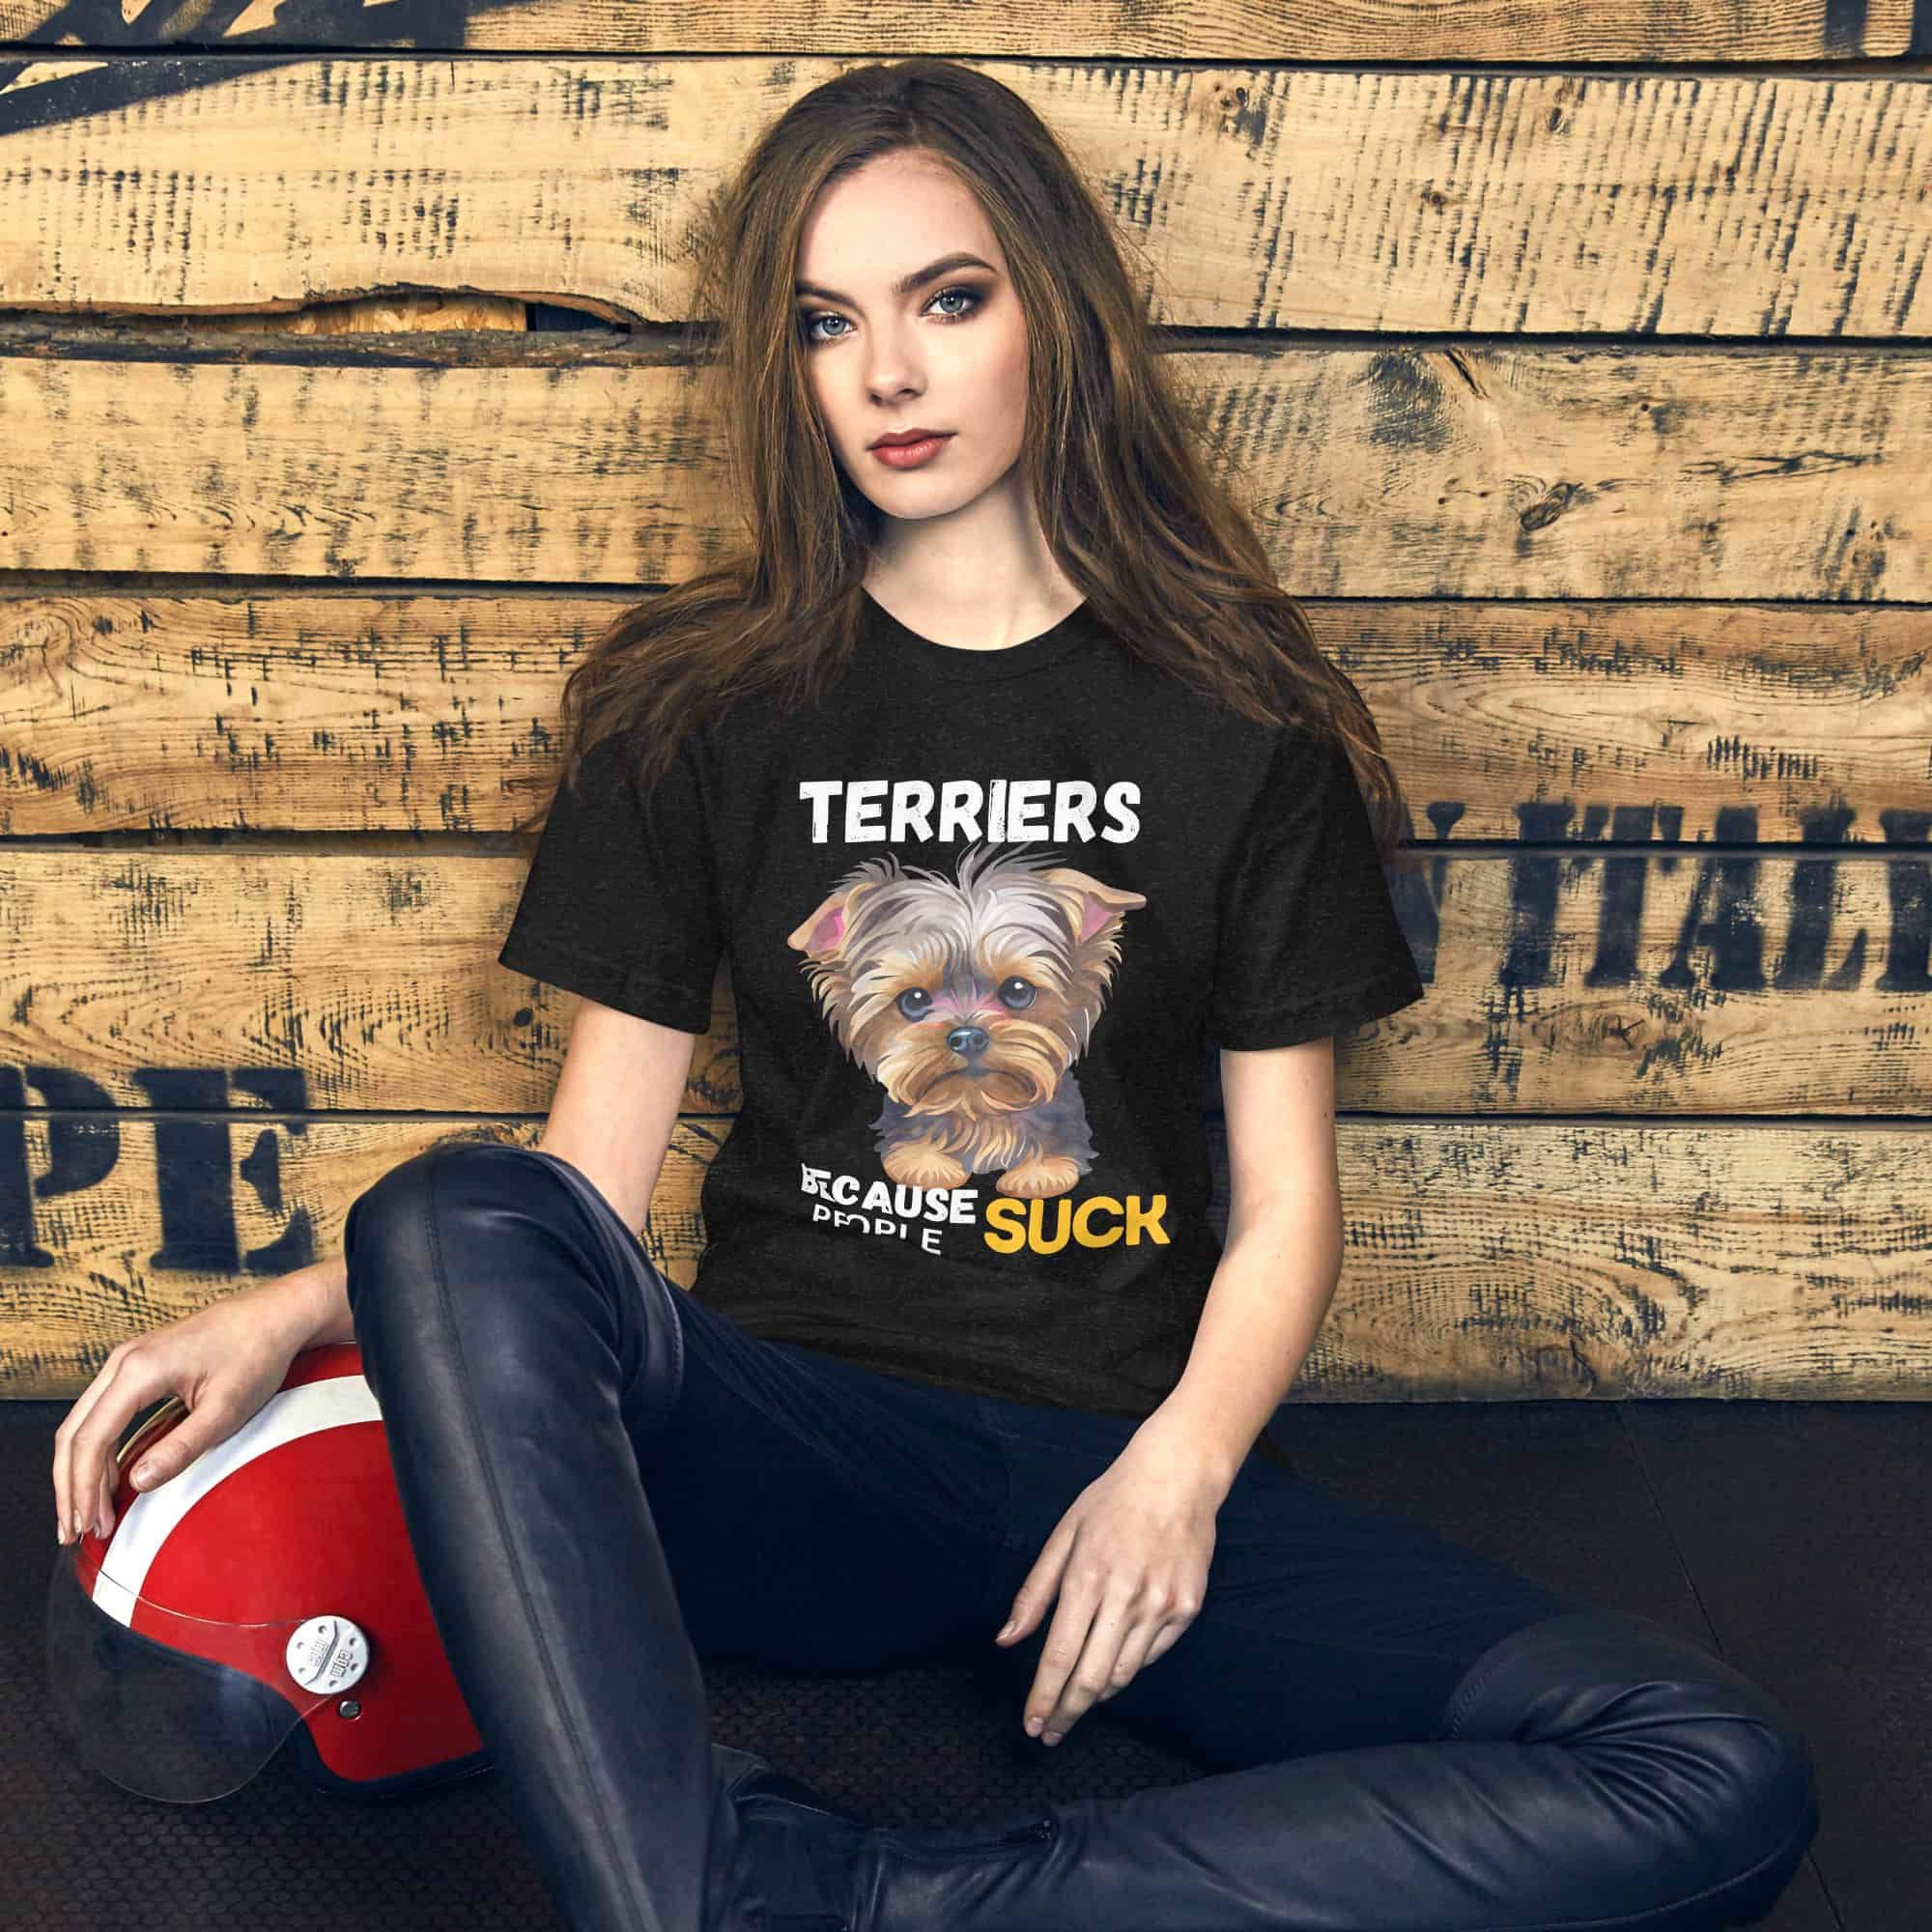 Terriers Because People Suck Unisex T-Shirt female t